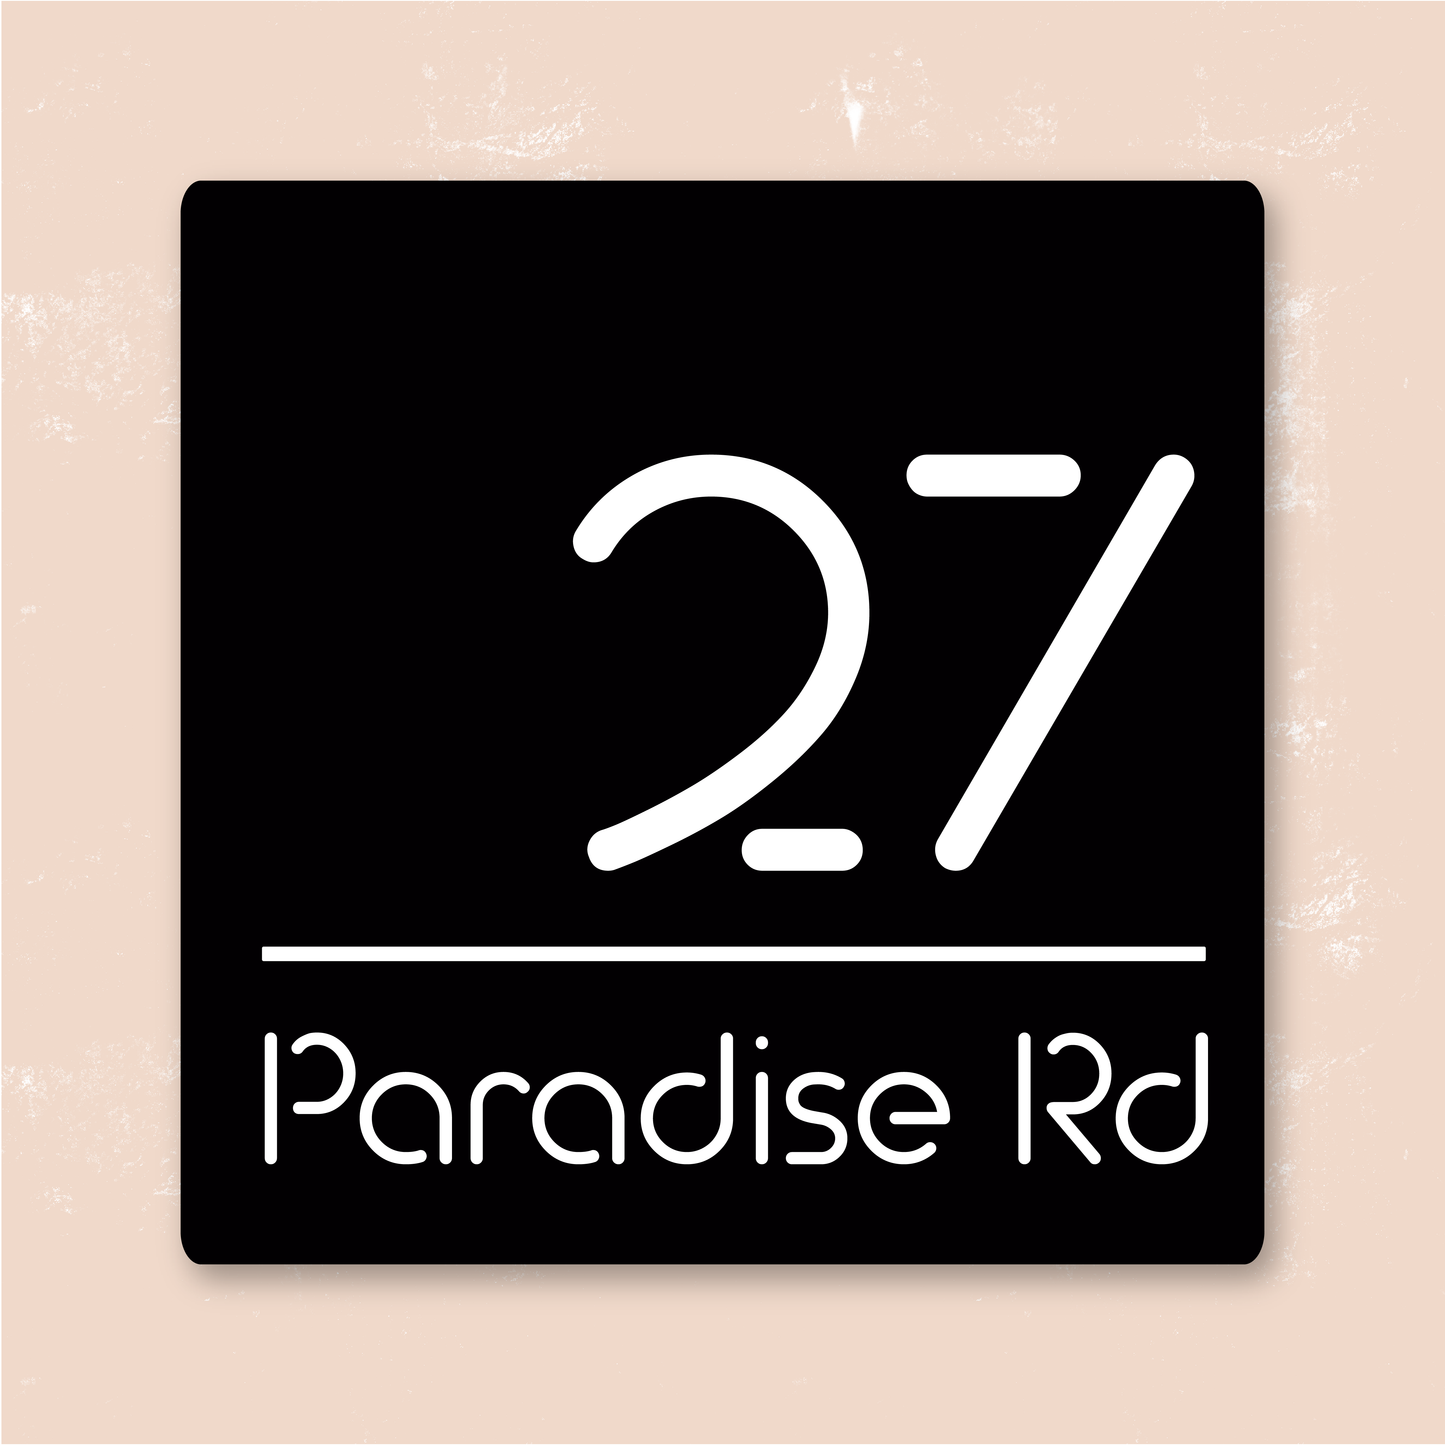 Square House Sign | Numeral & Street Name